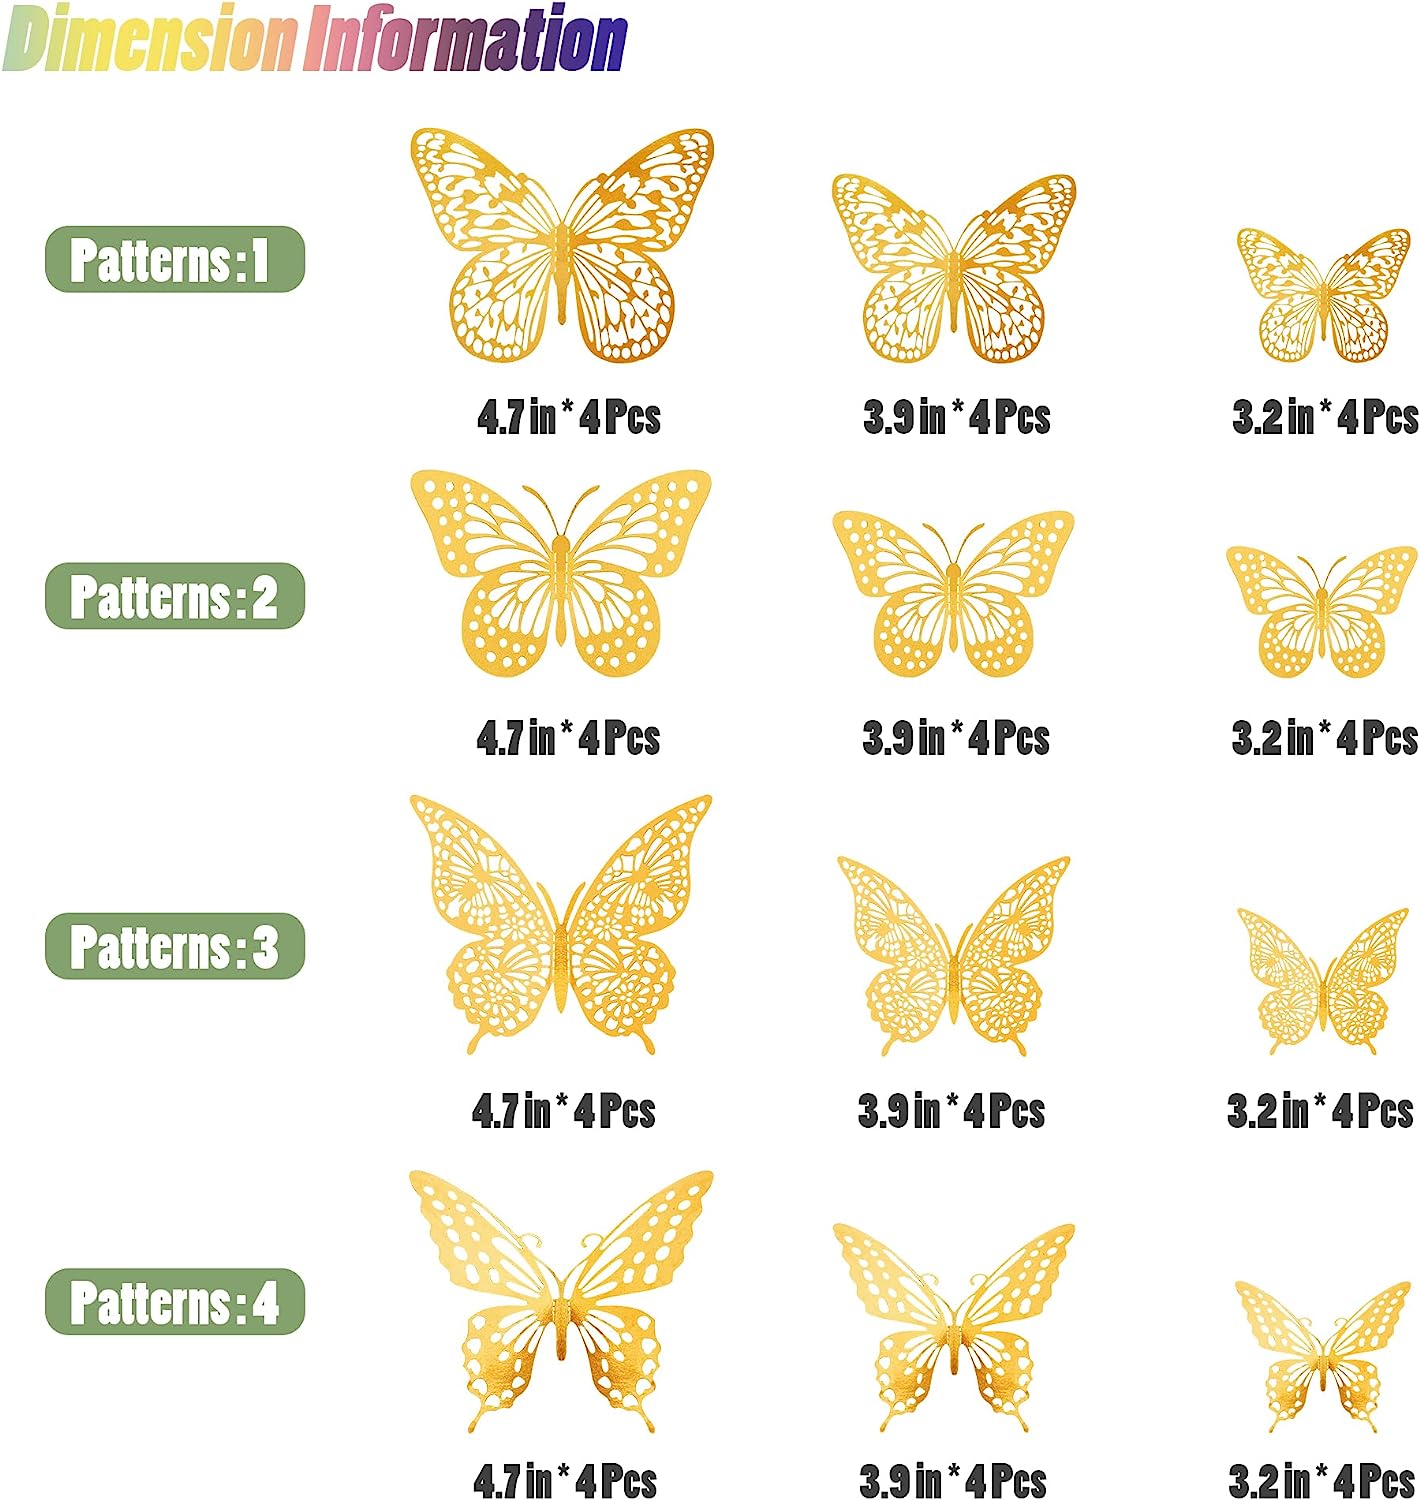 SAOROPEB 3D Butterfly Wall Decor - 48 Pcs, 4 Styles, 3 Sizes - Gold Butterfly Decorations for Birthday, Party, and Cake Decor - Removable Wall Stickers for Kids Nursery, Classroom, and Wedding Decor (Gold)